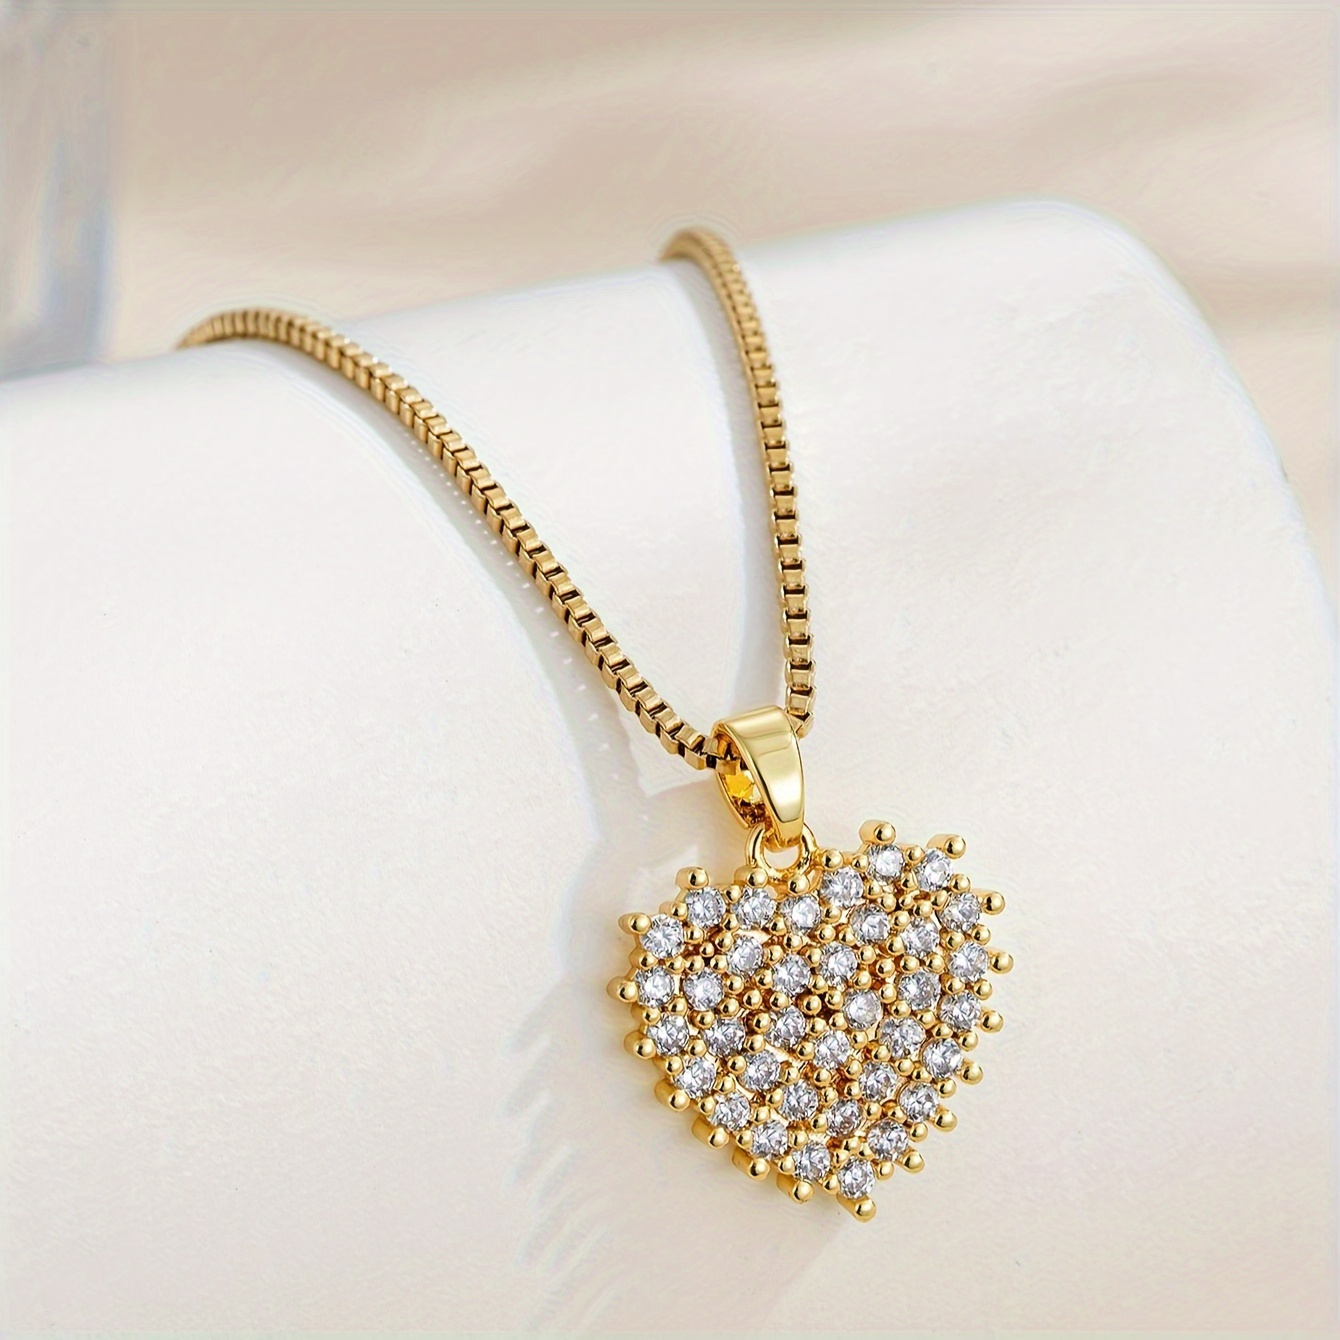 

1pc Golden Stainless Steel Chain Necklace, Cubic Zirconia Love Heart Pendant, Retro Charm Fashion Trendy Simple Men Women Couple Jewelry, Street Daily Party Christmas Halloween Gift